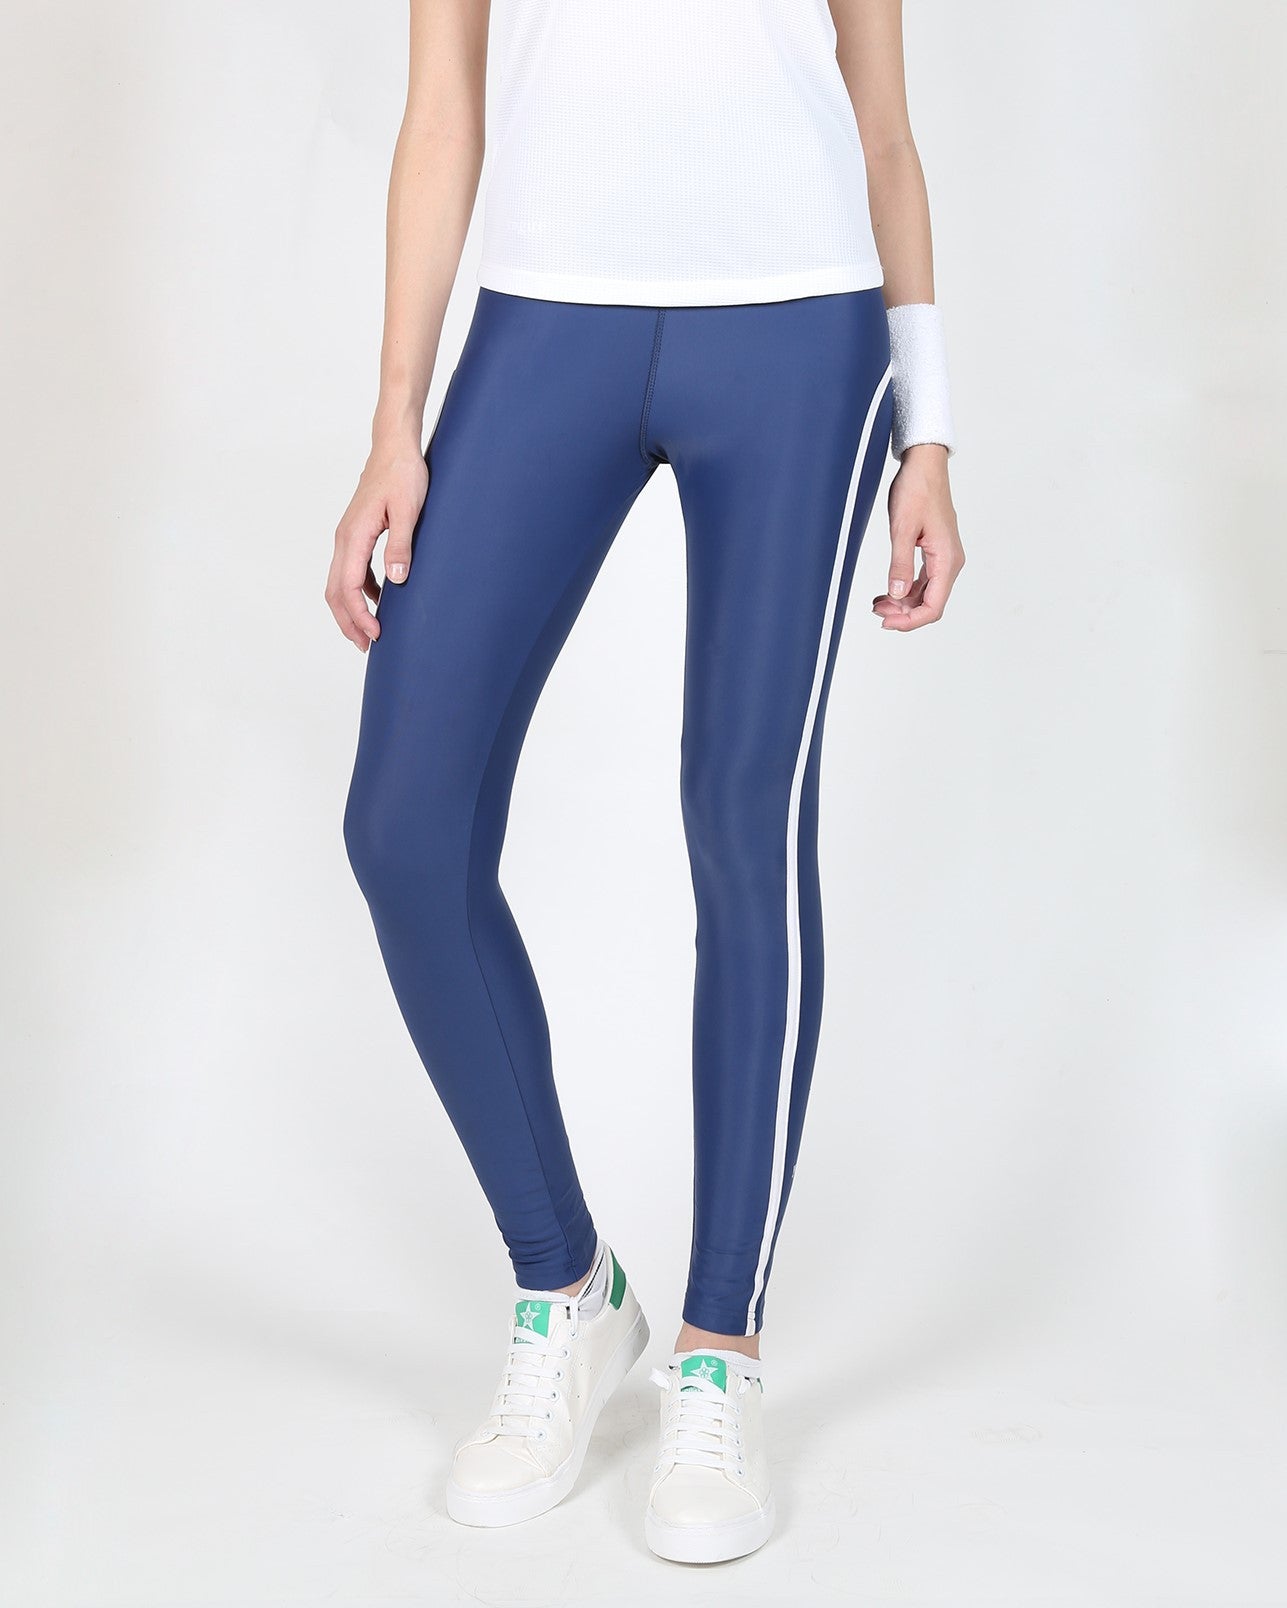 Get Your Perfect Pair: Seamless Candy's Top-Selling Women's Leggings